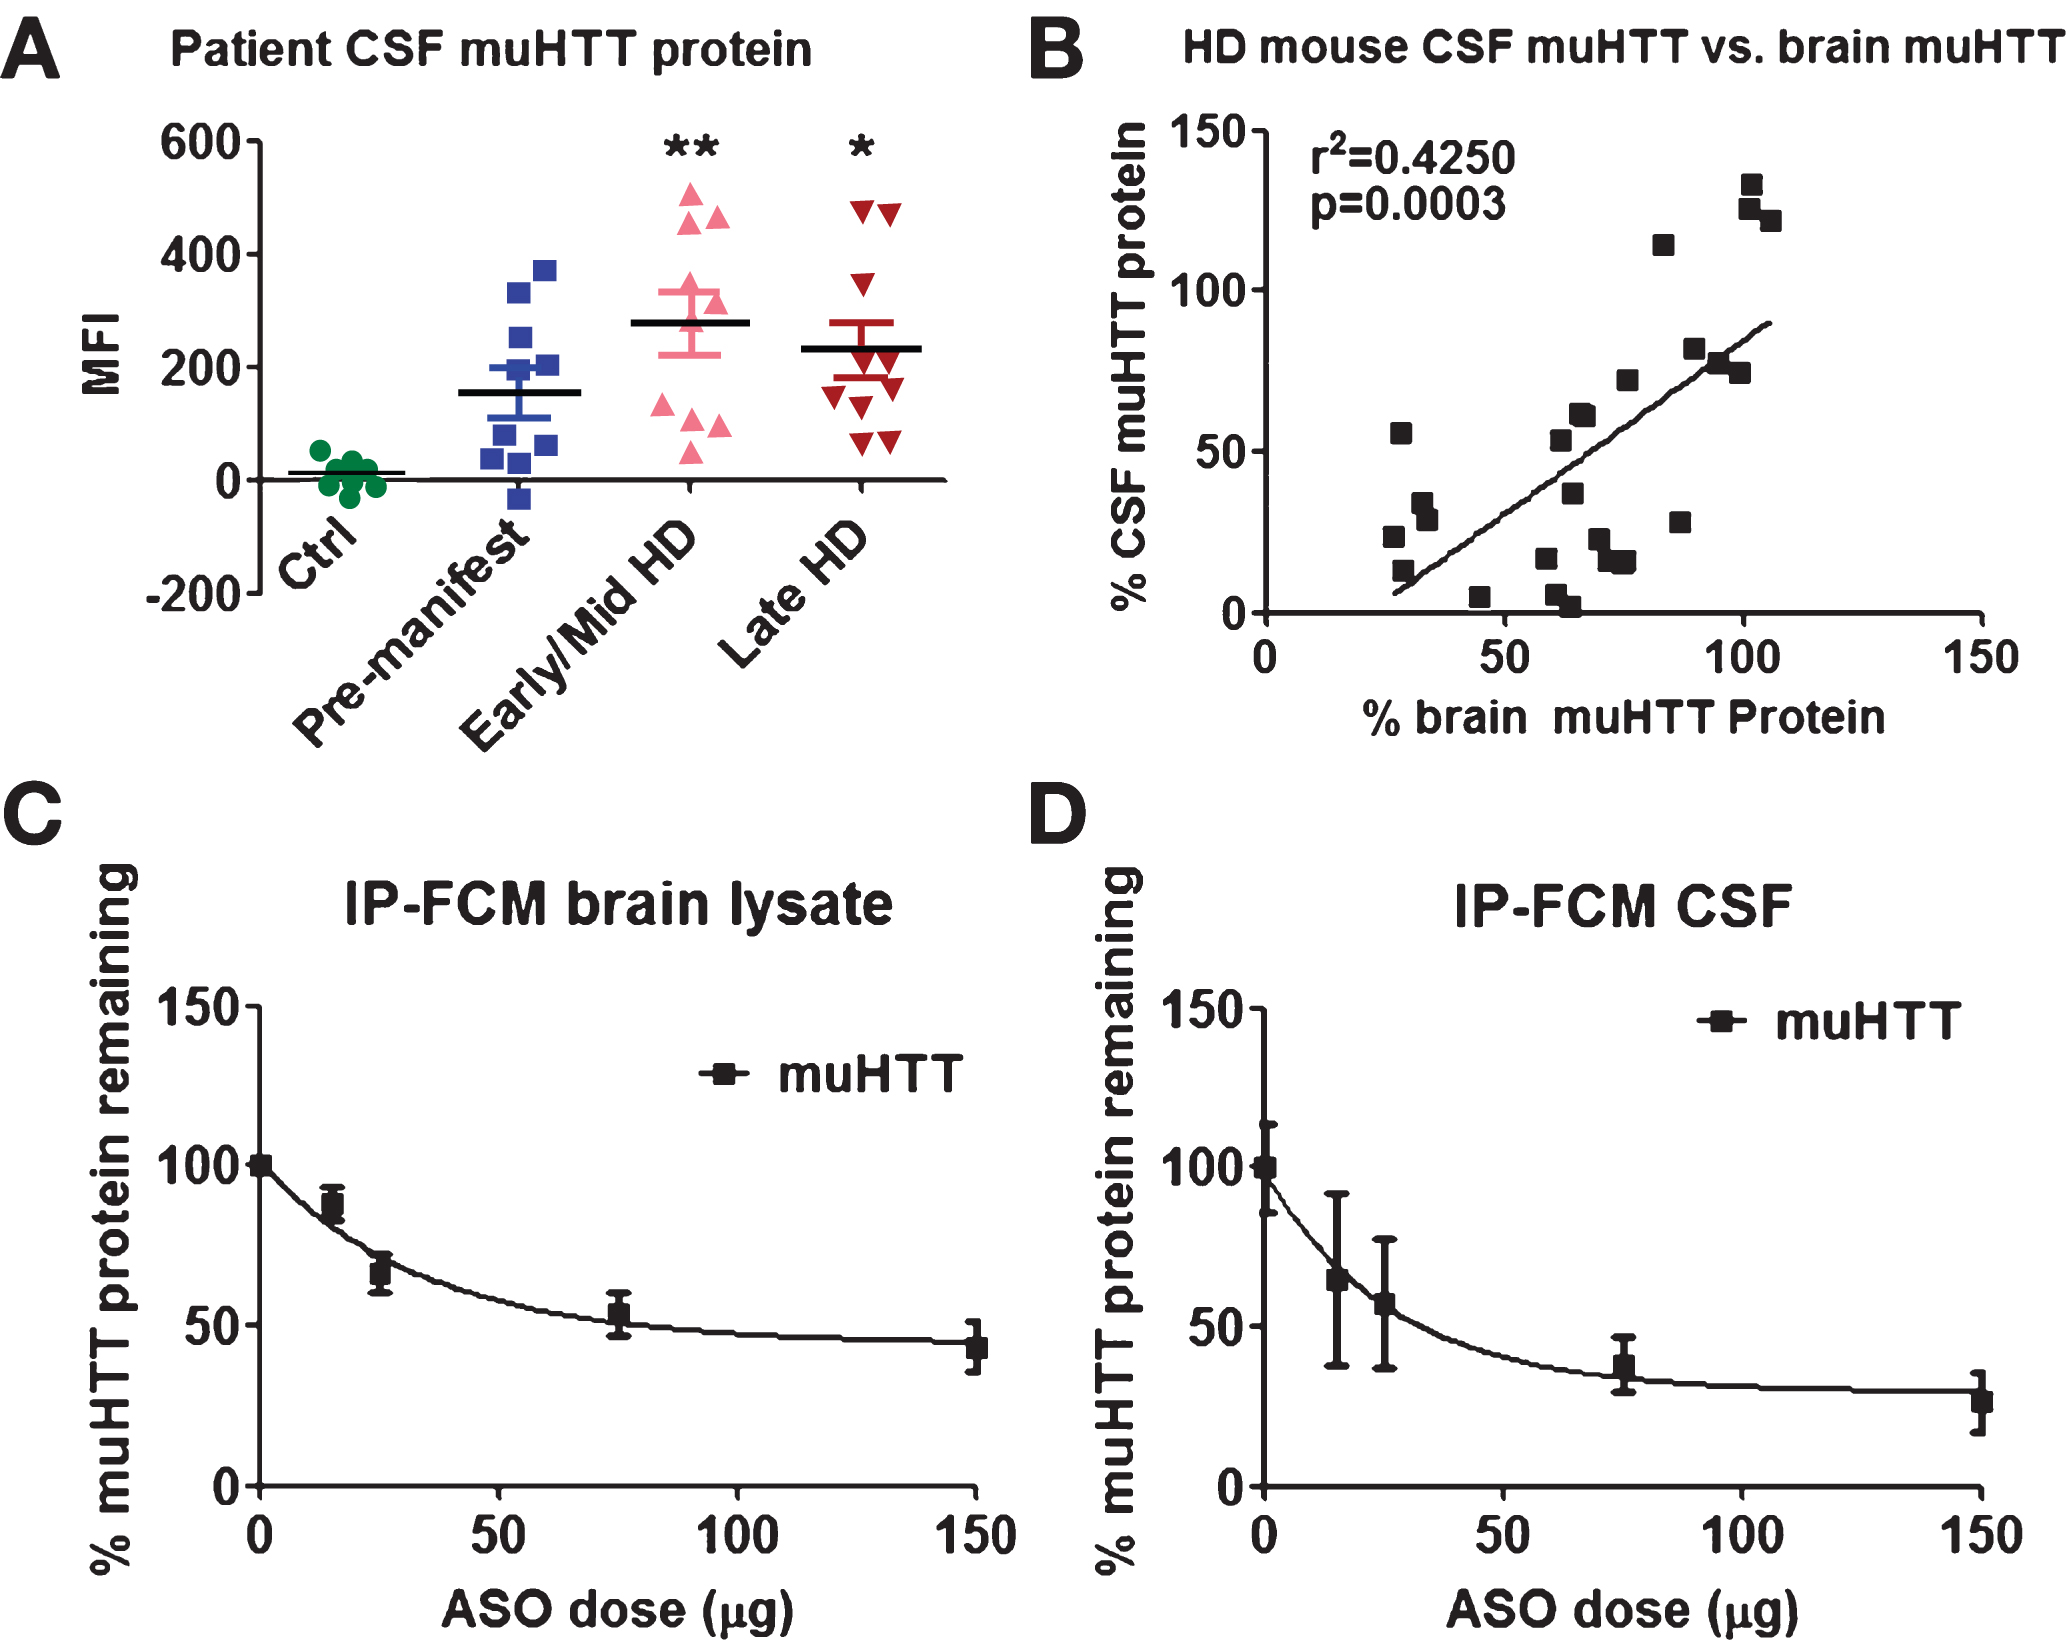 CSF mHTT positively correlates with brain levels after treatment of 
HTT-lowering anti-sense oligonucleotide. The IP-FCM mHTT assay confirmed (A) mHTT 
can distinguish between controls and gene carriers; (B) mHTT levels in brain lysate 
and CSF strongly correlate after HTT-lowering treatment; and reduction in mHTT levels increases with ASO dosage in (C) brain and (D) CSF. Adapted from Southwell et al. [83] with the author’s and publisher’s permission.